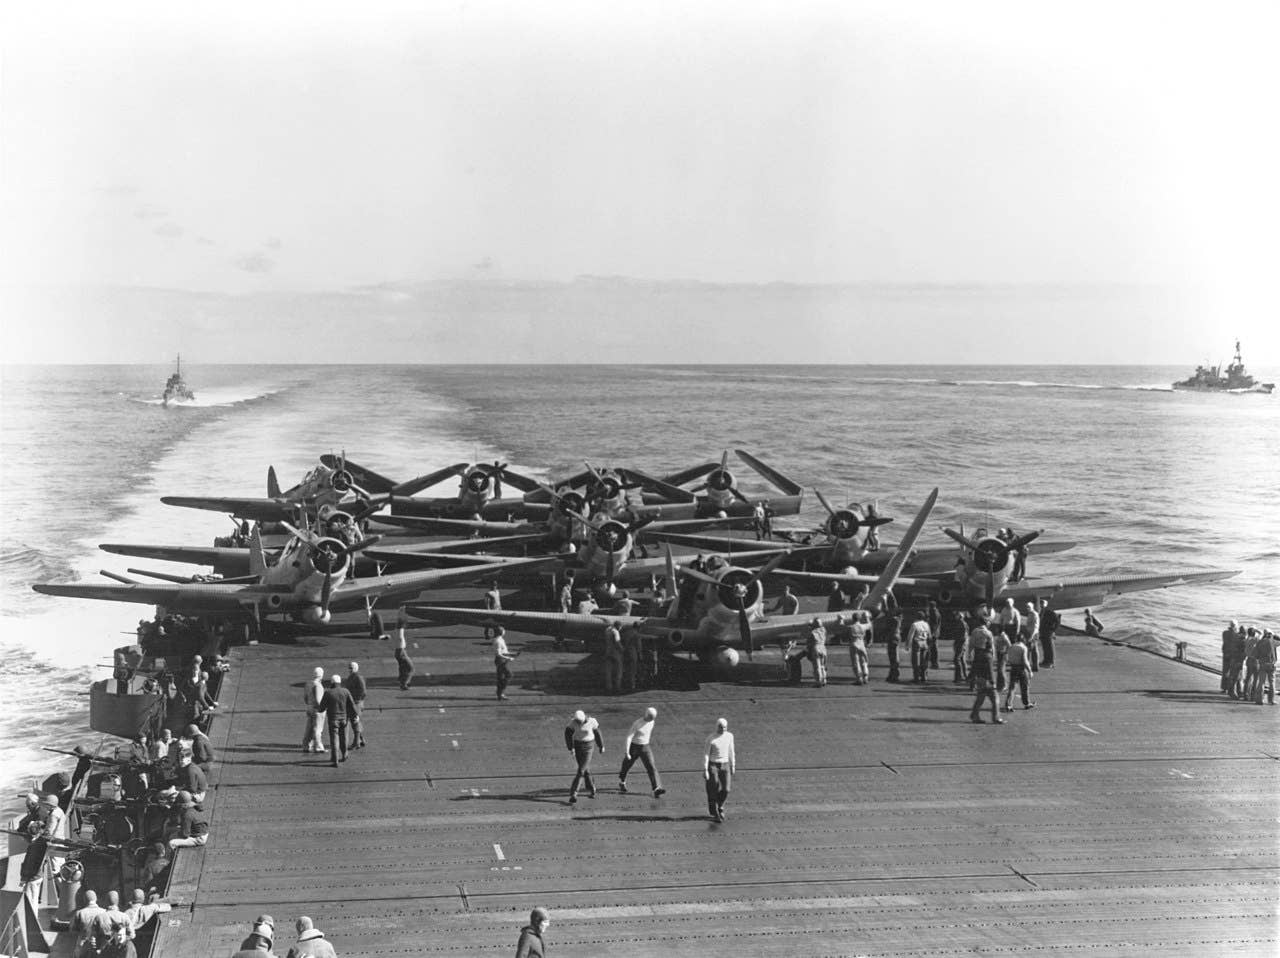 U.S. Navy Torpedo Squadron 6 (VT-6) Douglas TBD-1 Devastator aircraft are prepared for launching aboard the aircraft carrier USS Enterprise (CV-6) at about 0730-0740 hrs, 4 June 1942. (Wikimedia Commons)